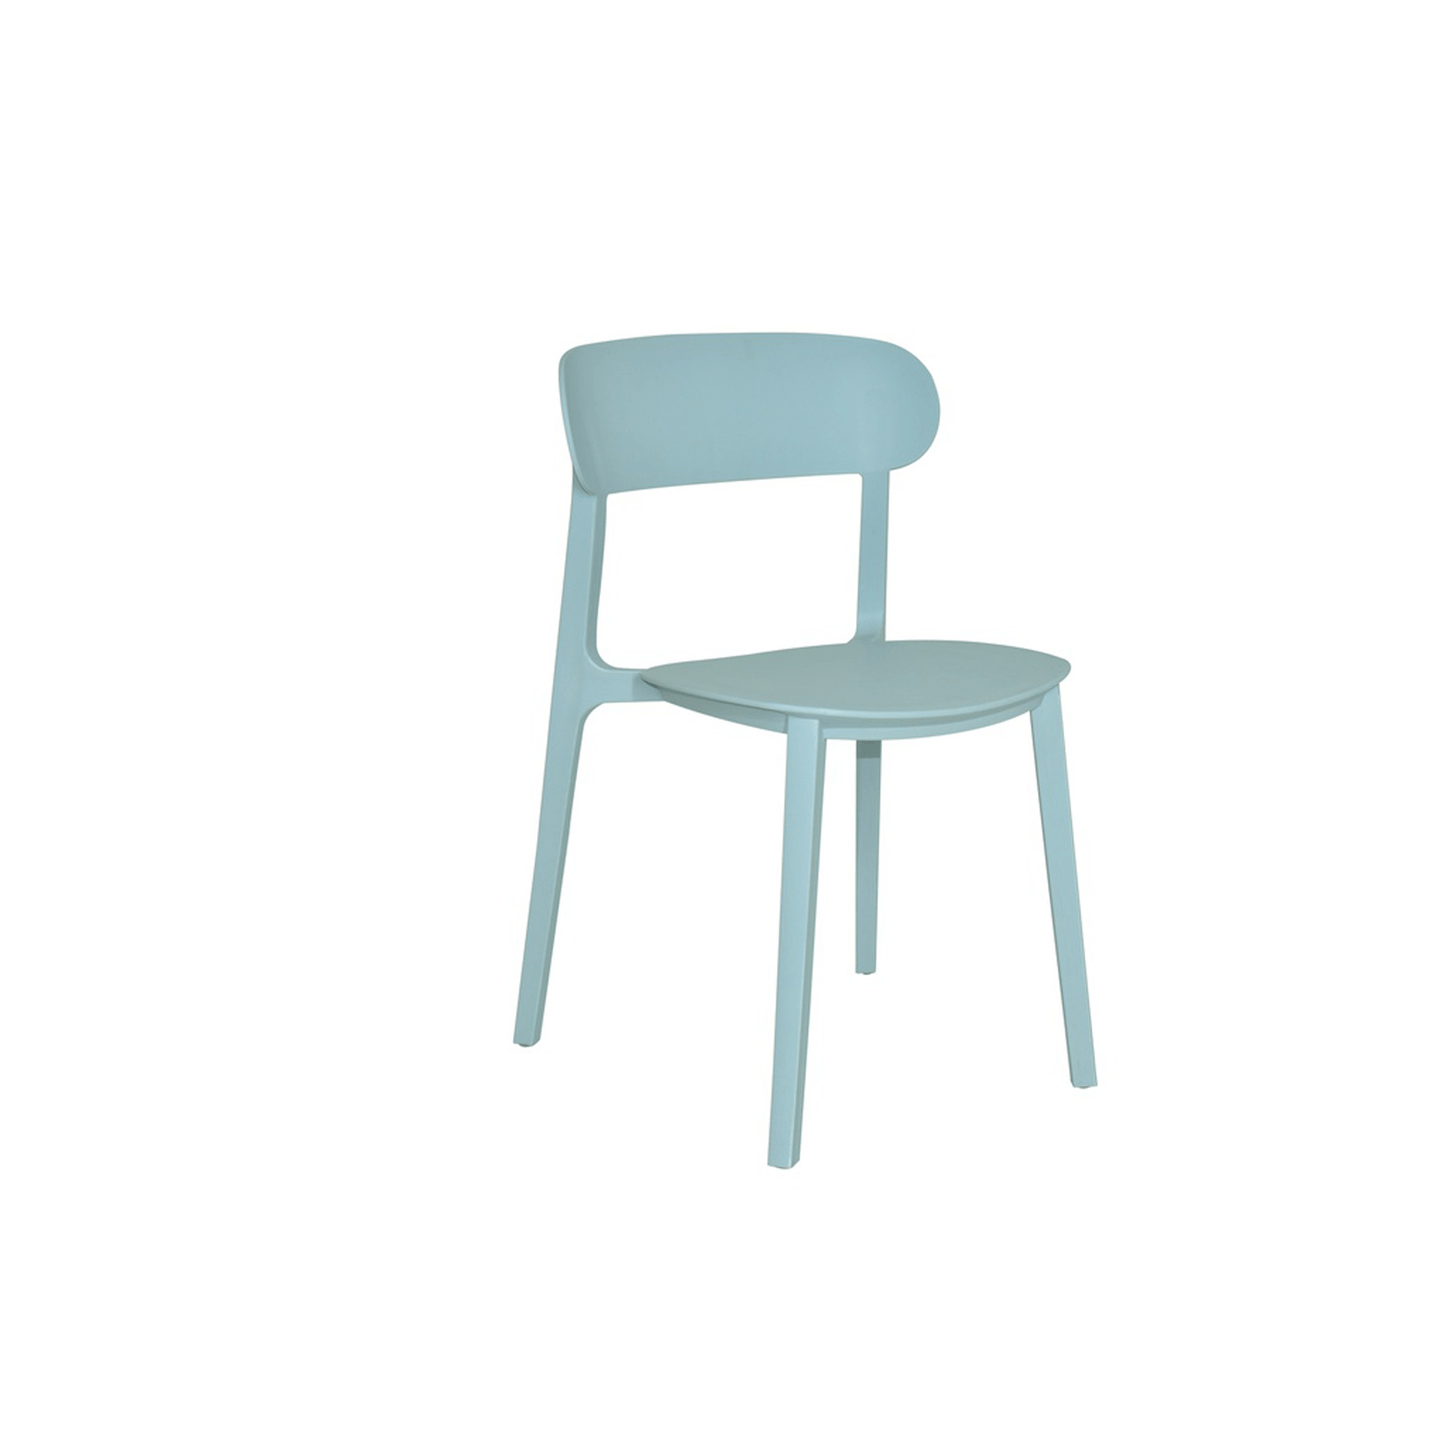 Simple Cafe Chair